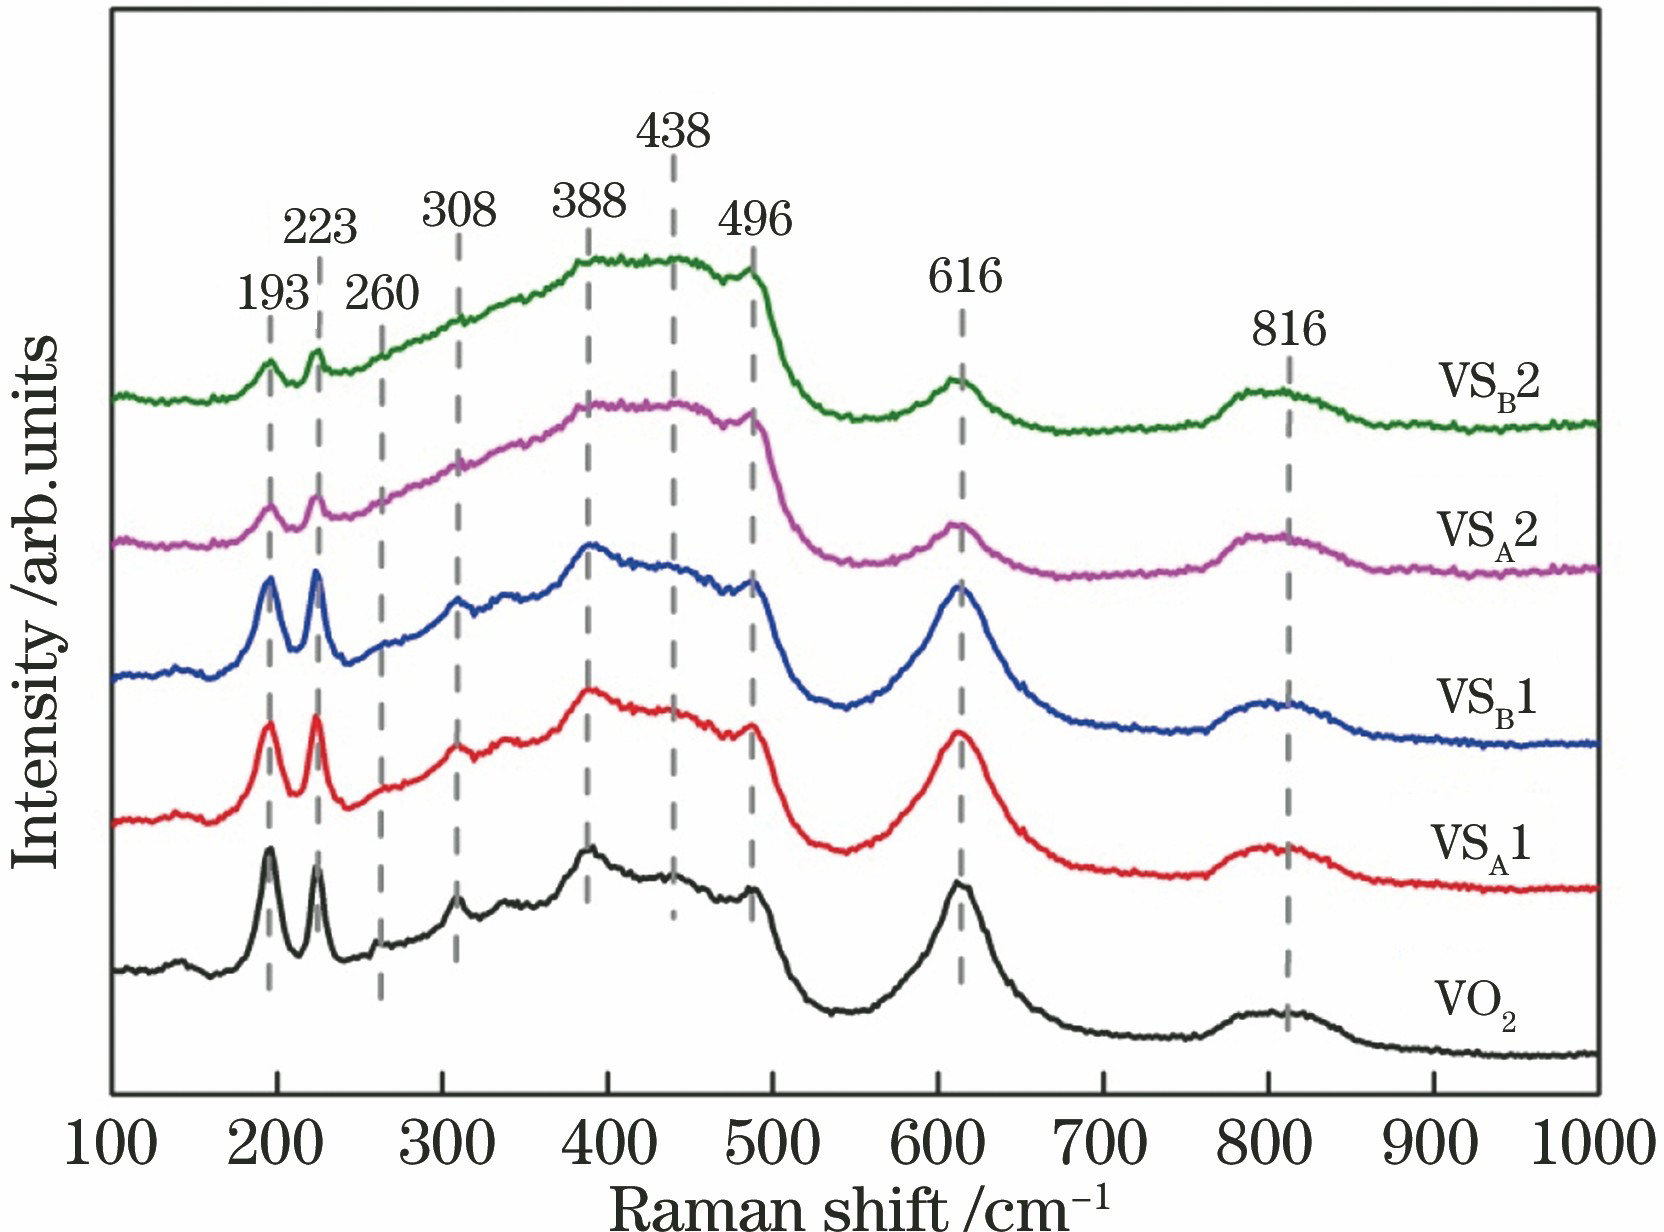 Raman scattering spectra of samples